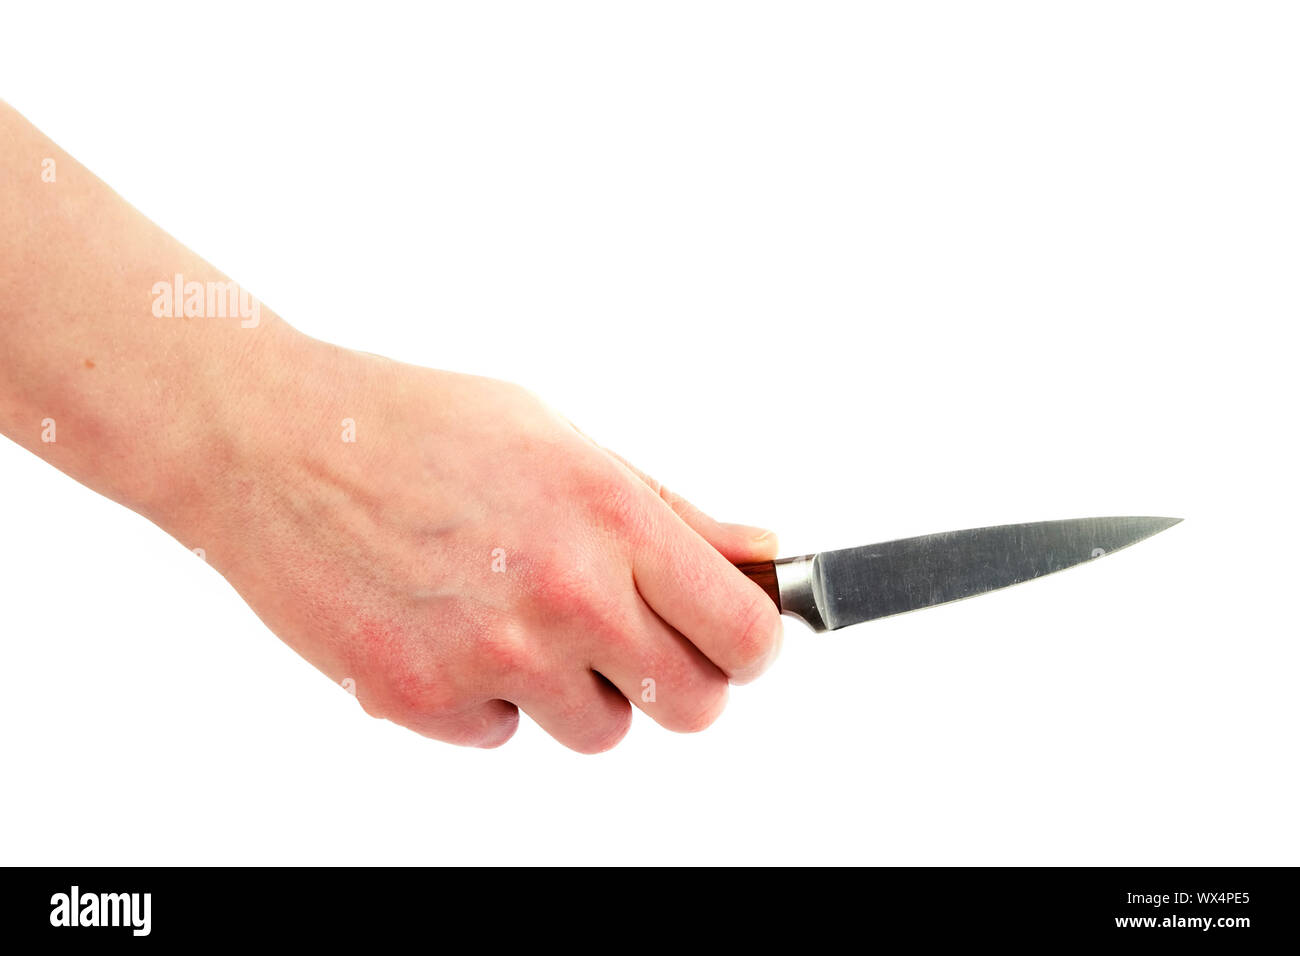 Pearing Knife in Hand Stock Photo